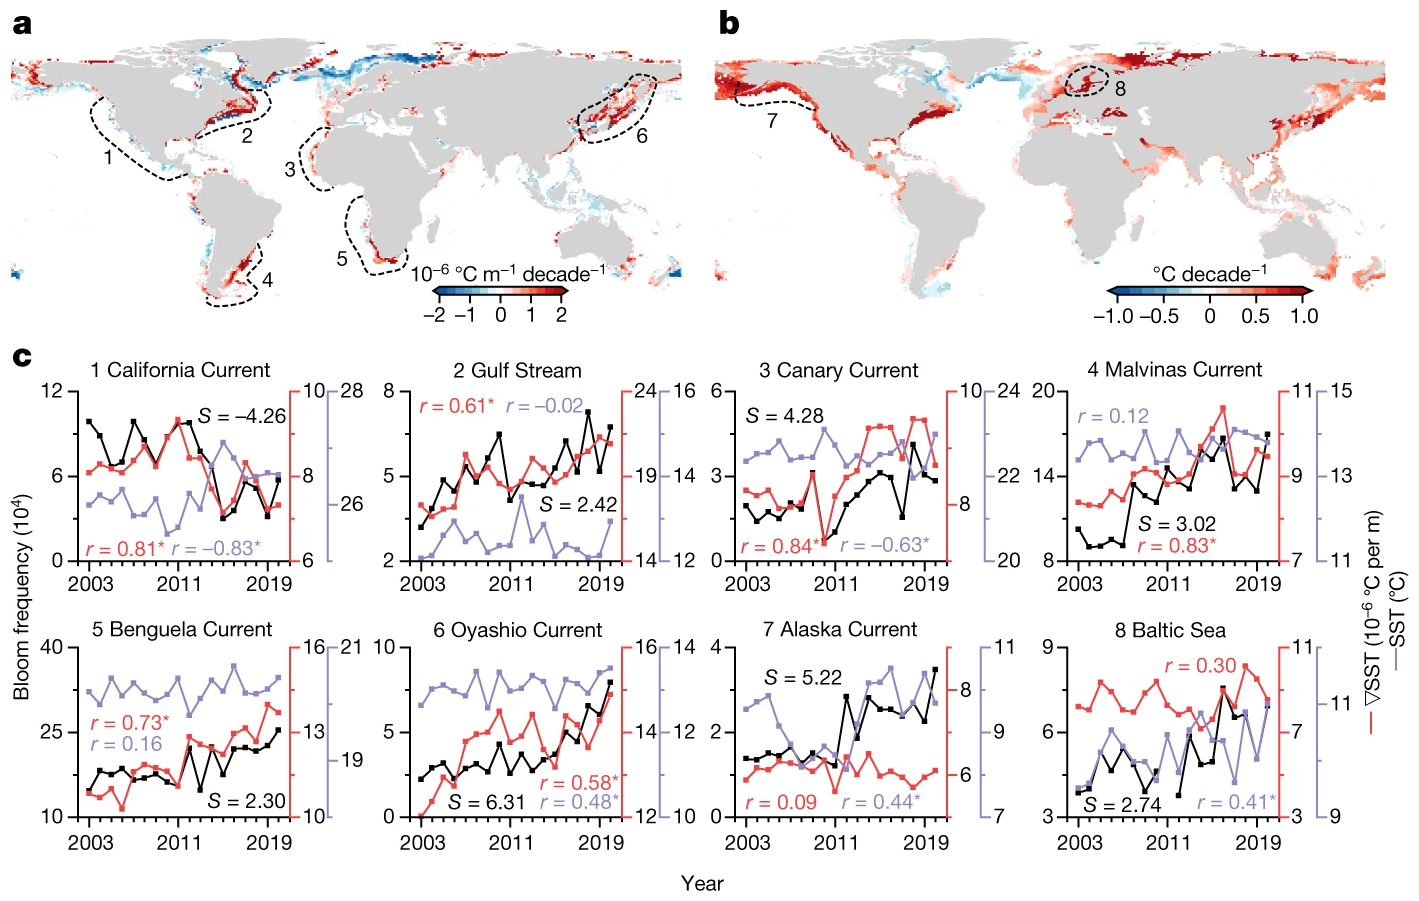 Effects of climate change on phytoplankton blooms. a,b, Global patterns of trends in SST gradient (a) and SST (b) from 2003 to 2020. c, Long-term changes in bloom frequency in the regions labelled in a and b, and their relationship to the SST and SST gradient. Linear slope (S) of bloom frequency and the correlation coefficient (r) between bloom frequency and the SST and the SST gradient (∇SST) are shown. Asterisks indicate statistically significant (P < 0.05) correlations. Maps created using ArcMap 10.4 and Python 3.8. Graphic: Dai, et al., 2023 / Nature